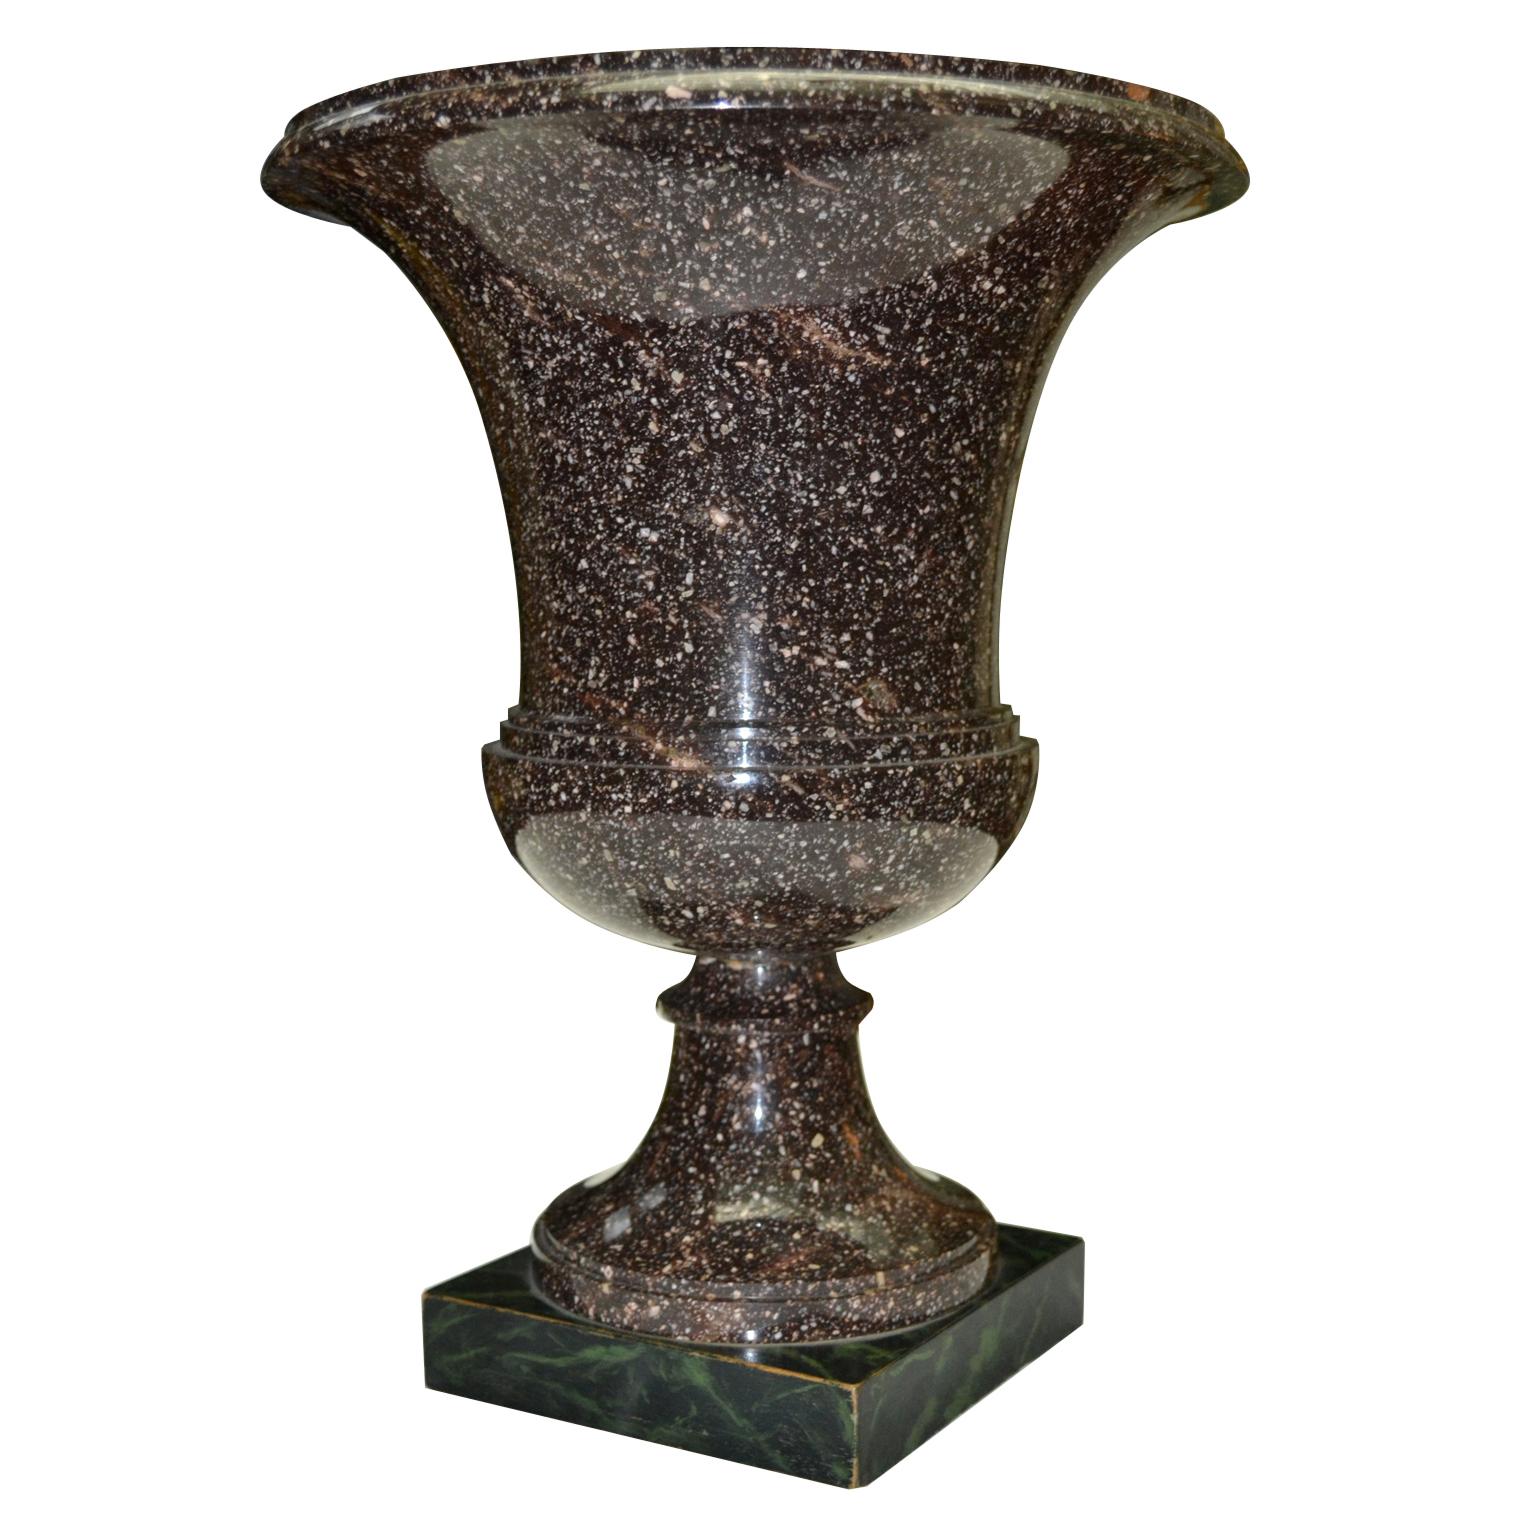 Hand-Carved 19th Century Neoclassical Swedish or Russian Porphyry Campana Urn Vase For Sale